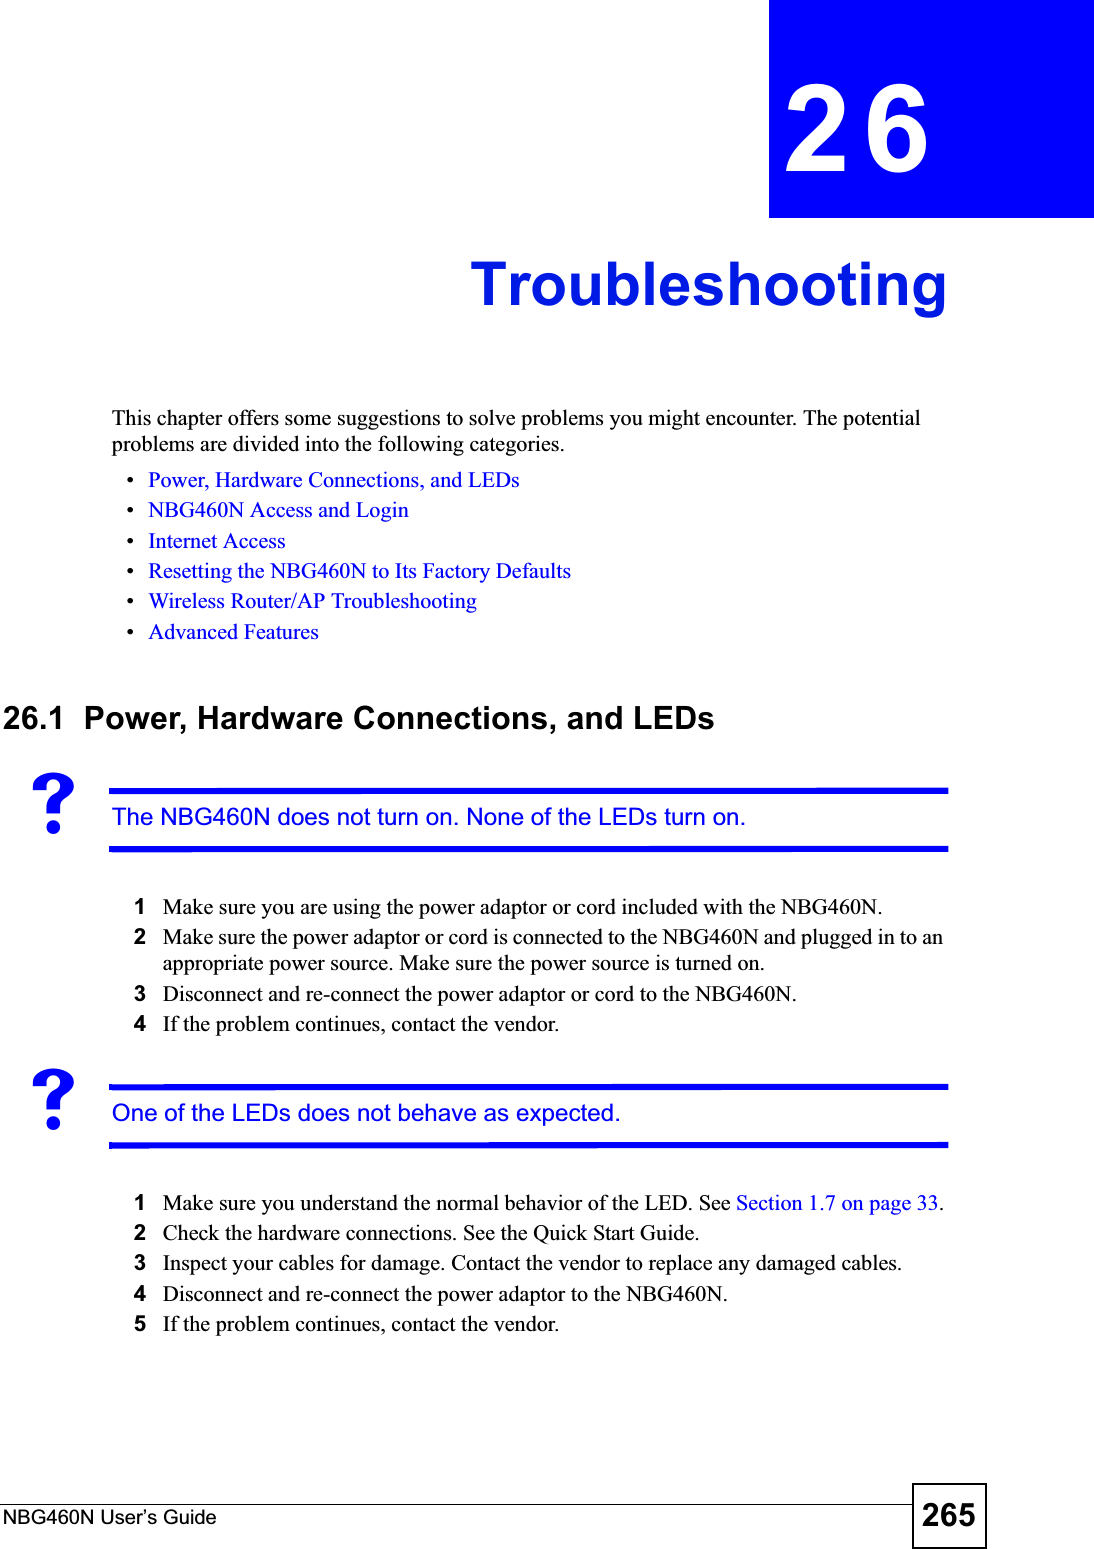 NBG460N User’s Guide 265CHAPTER 26TroubleshootingThis chapter offers some suggestions to solve problems you might encounter. The potential problems are divided into the following categories. •Power, Hardware Connections, and LEDs•NBG460N Access and Login•Internet Access•Resetting the NBG460N to Its Factory Defaults•Wireless Router/AP Troubleshooting•Advanced Features26.1  Power, Hardware Connections, and LEDsVThe NBG460N does not turn on. None of the LEDs turn on.1Make sure you are using the power adaptor or cord included with the NBG460N.2Make sure the power adaptor or cord is connected to the NBG460N and plugged in to an appropriate power source. Make sure the power source is turned on.3Disconnect and re-connect the power adaptor or cord to the NBG460N.4If the problem continues, contact the vendor.VOne of the LEDs does not behave as expected.1Make sure you understand the normal behavior of the LED. See Section 1.7 on page 33.2Check the hardware connections. See the Quick Start Guide. 3Inspect your cables for damage. Contact the vendor to replace any damaged cables.4Disconnect and re-connect the power adaptor to the NBG460N. 5If the problem continues, contact the vendor.